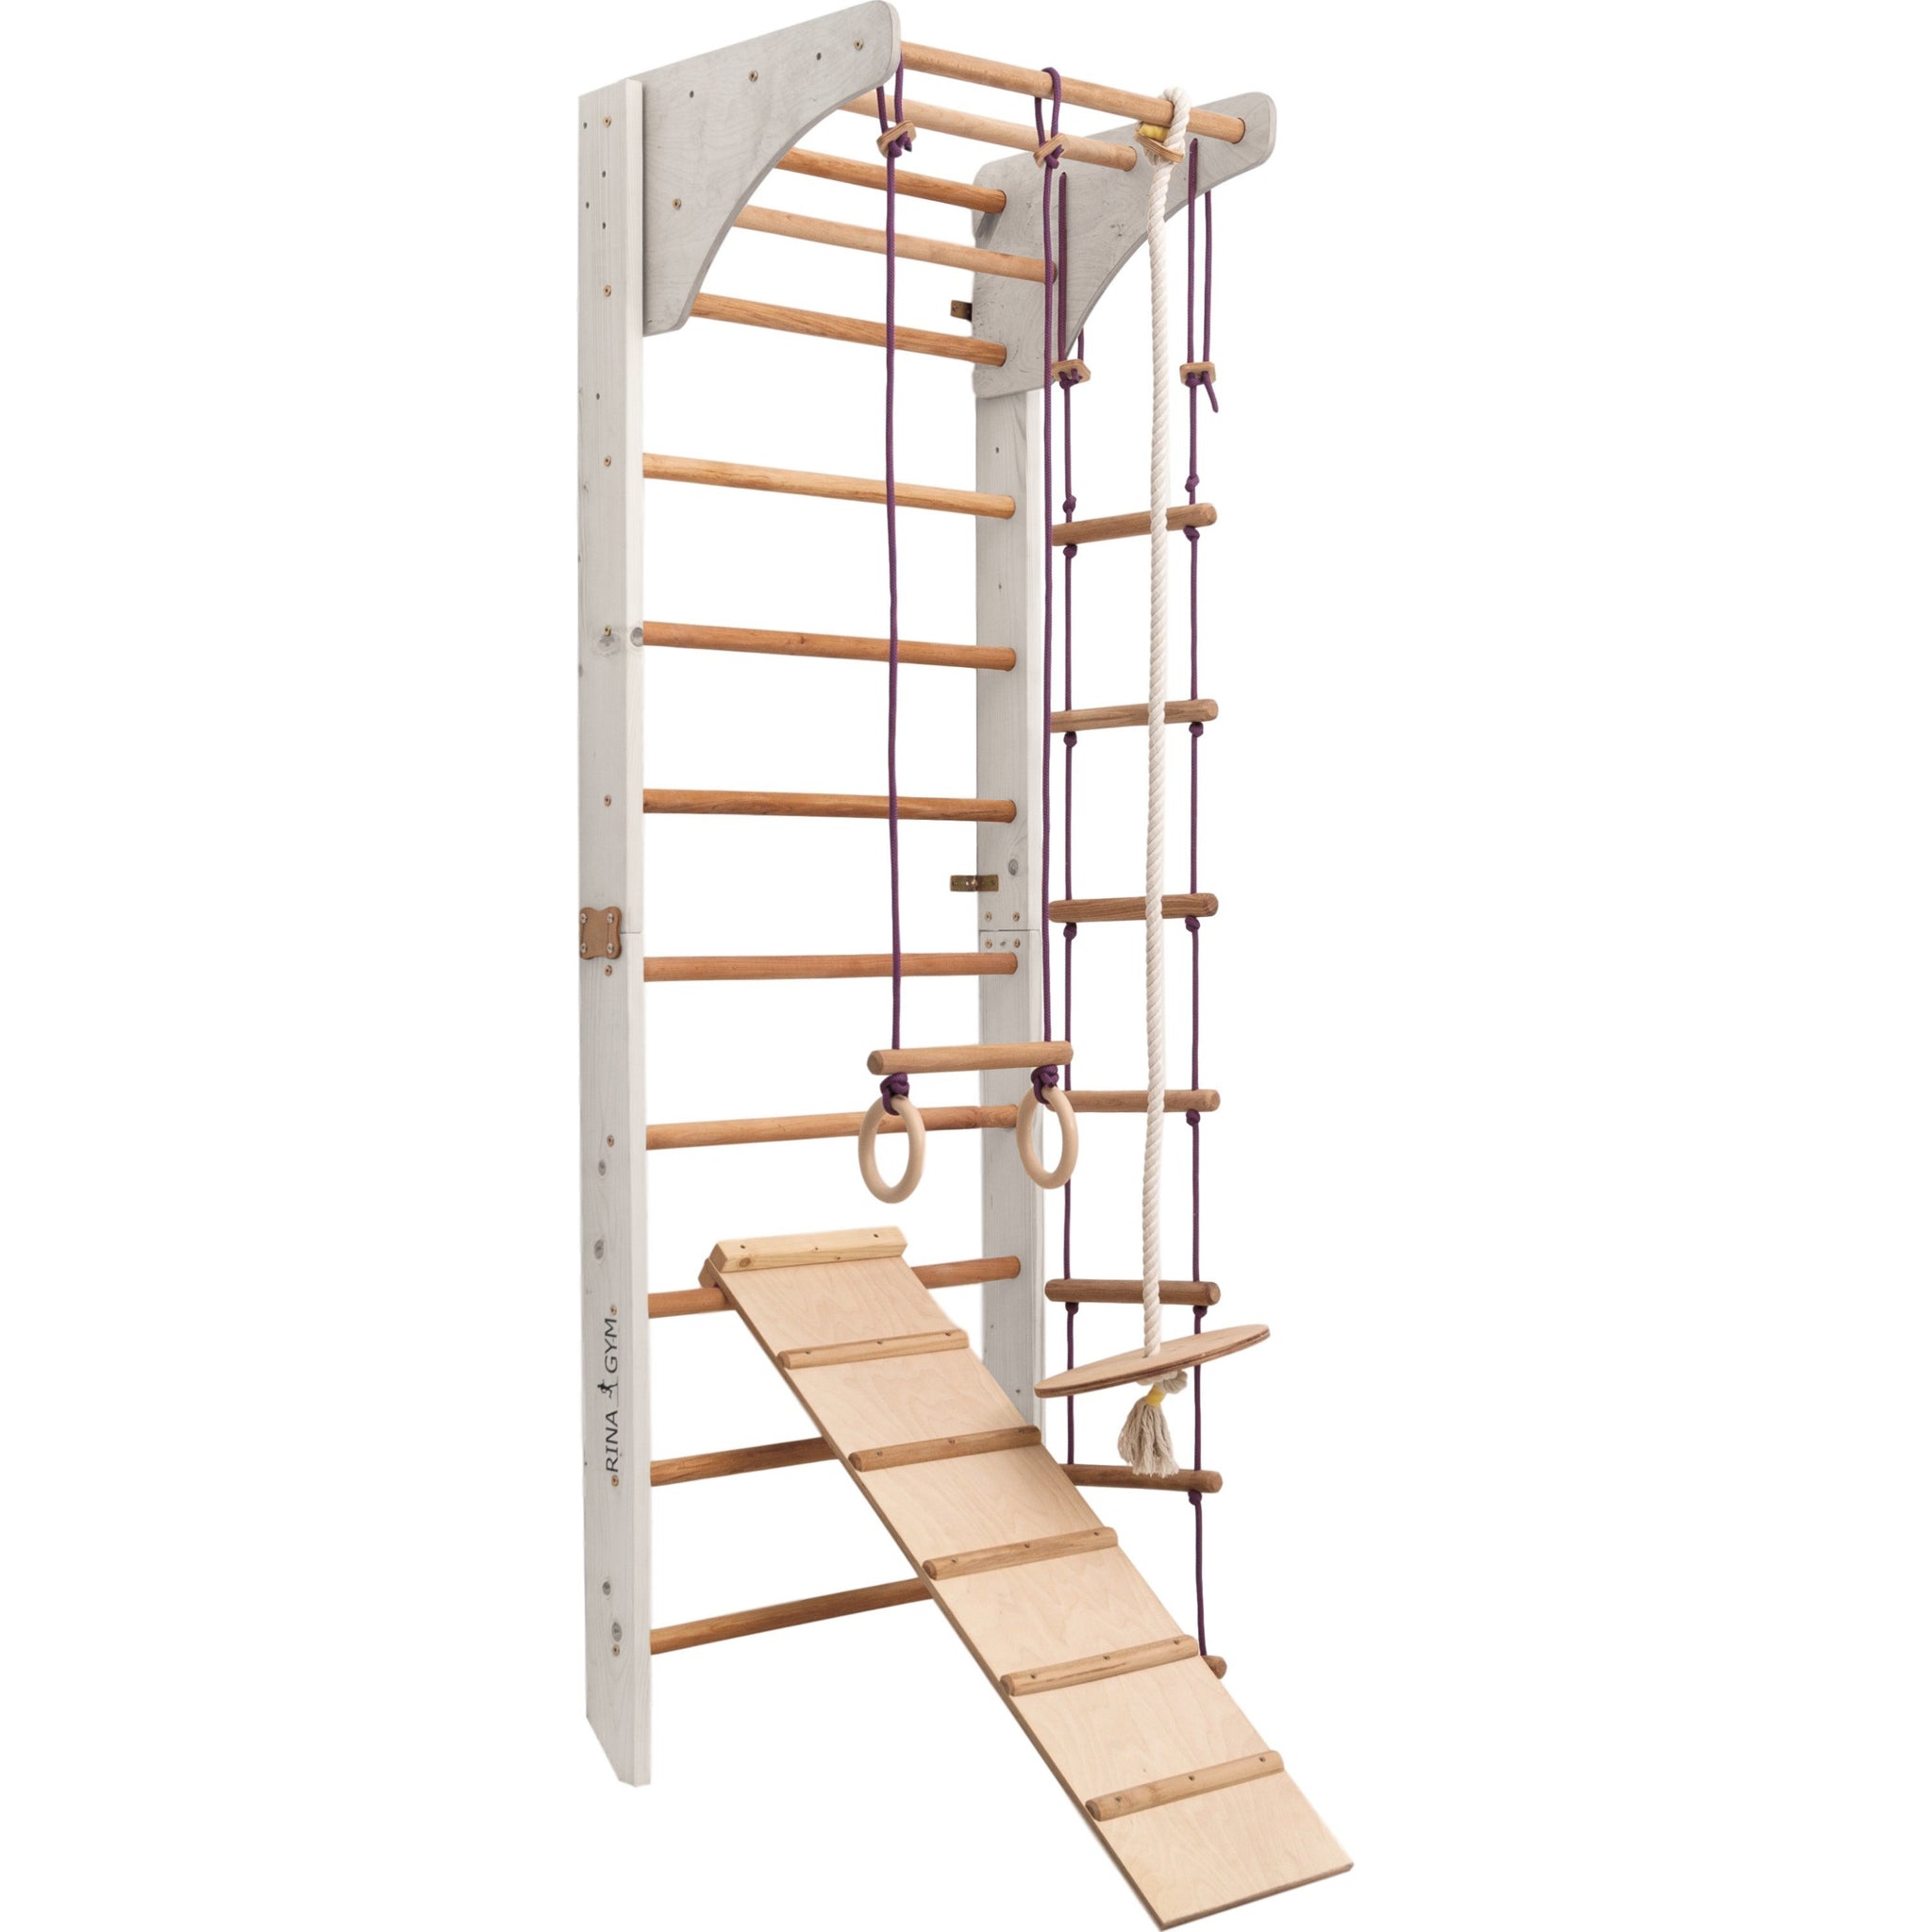 RINAGYM Gymnastics Play Set for Kids - Wooden Indoor & Outdoor Jungle Gym - Wall & Monkey Bars, Pole, Gymnastic Rings, Climbing Rope, Removable Beam, Swedish Ladder, Swing, Slide - Children 2yrs & Up (Kombi 3 white)